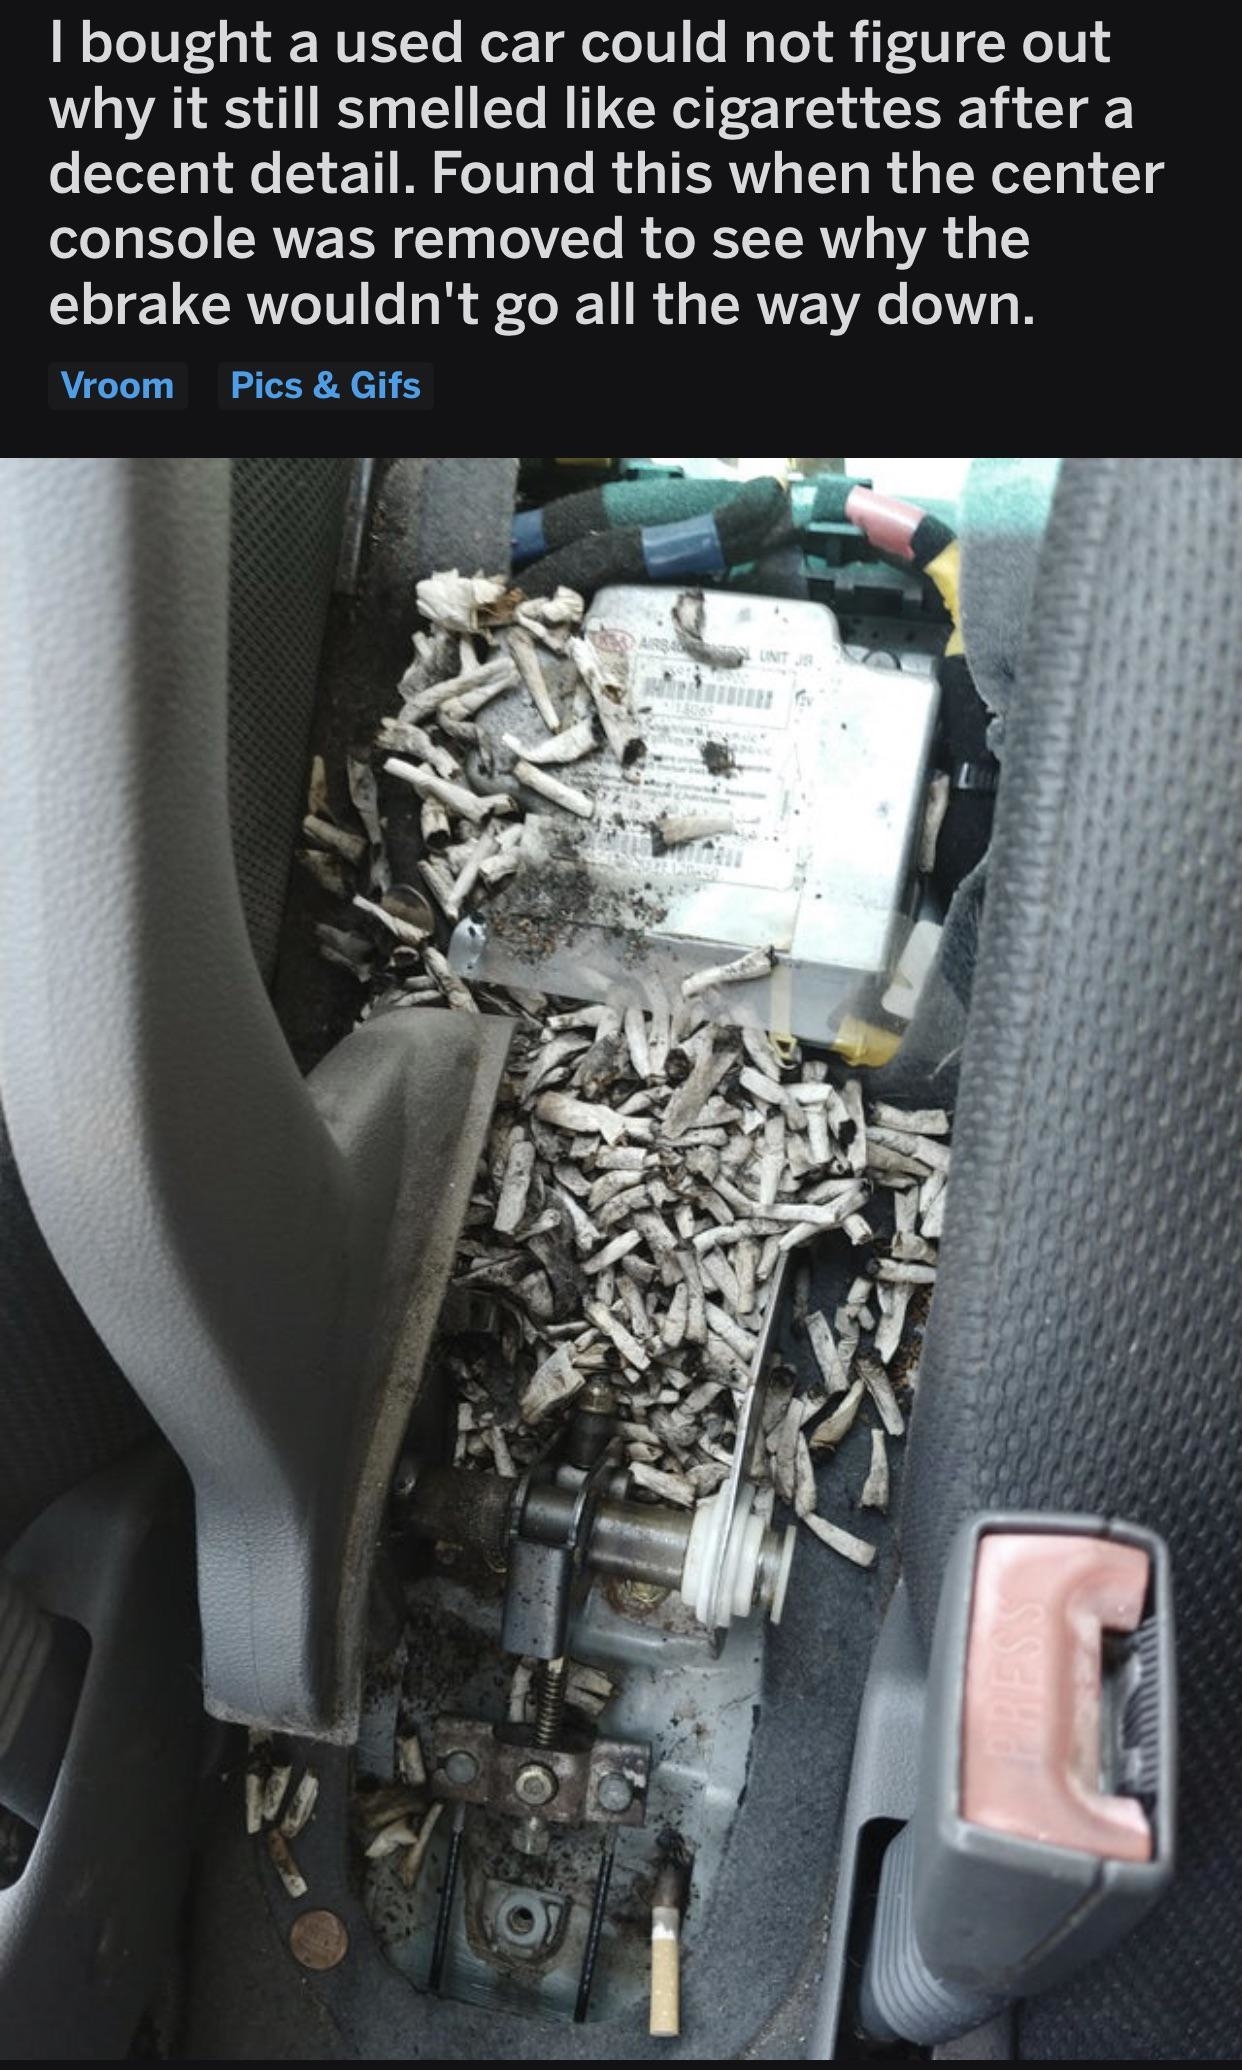 Person who just bought a used car finds a huge pile of cigarette butts behind the center console — which explains the cigarette smell